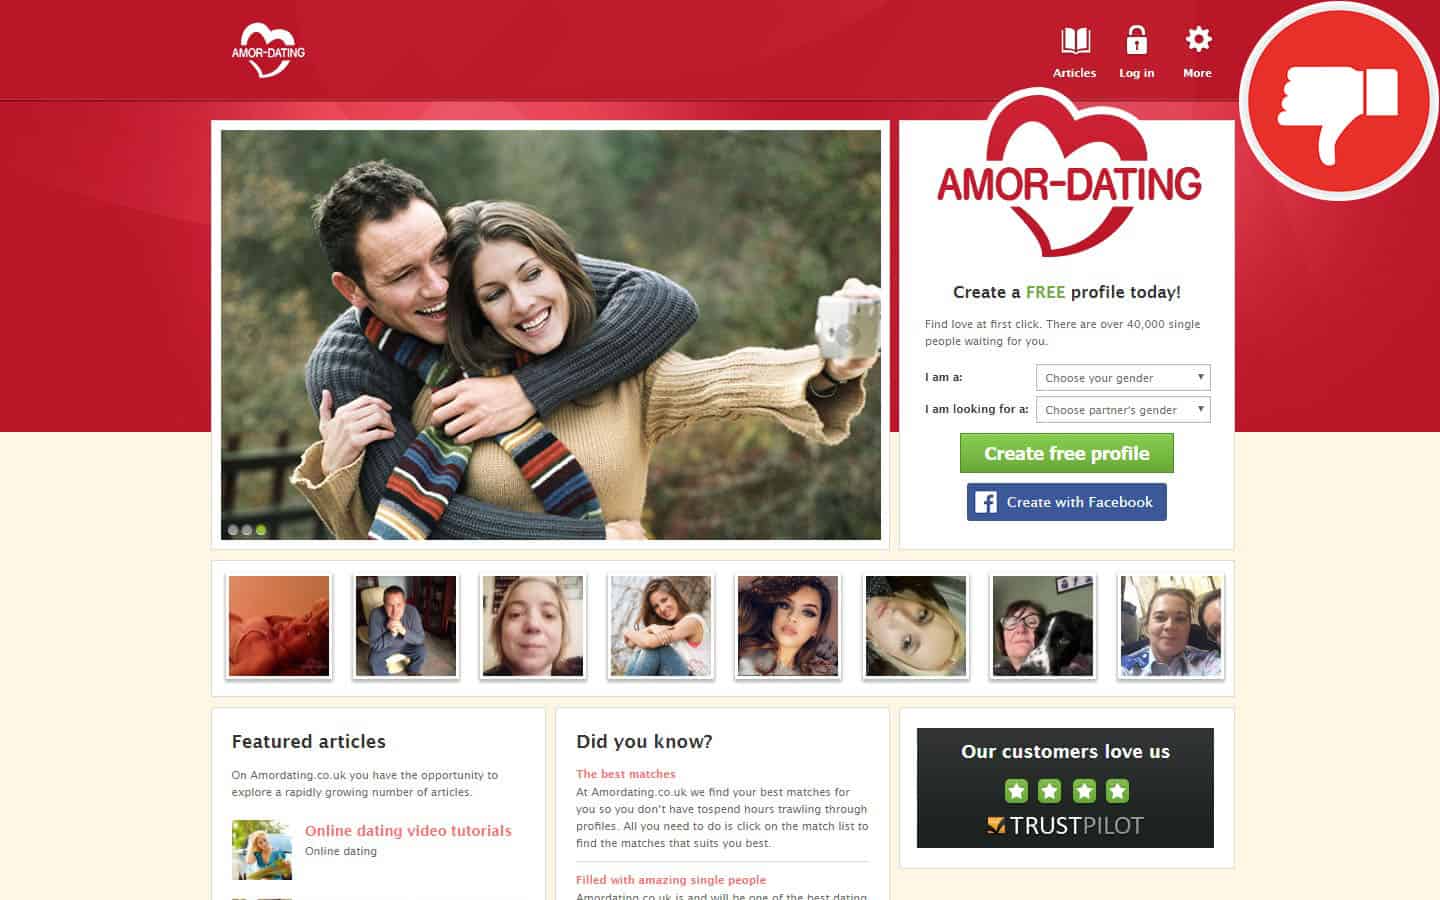 Review: amordating.co.uk Scam